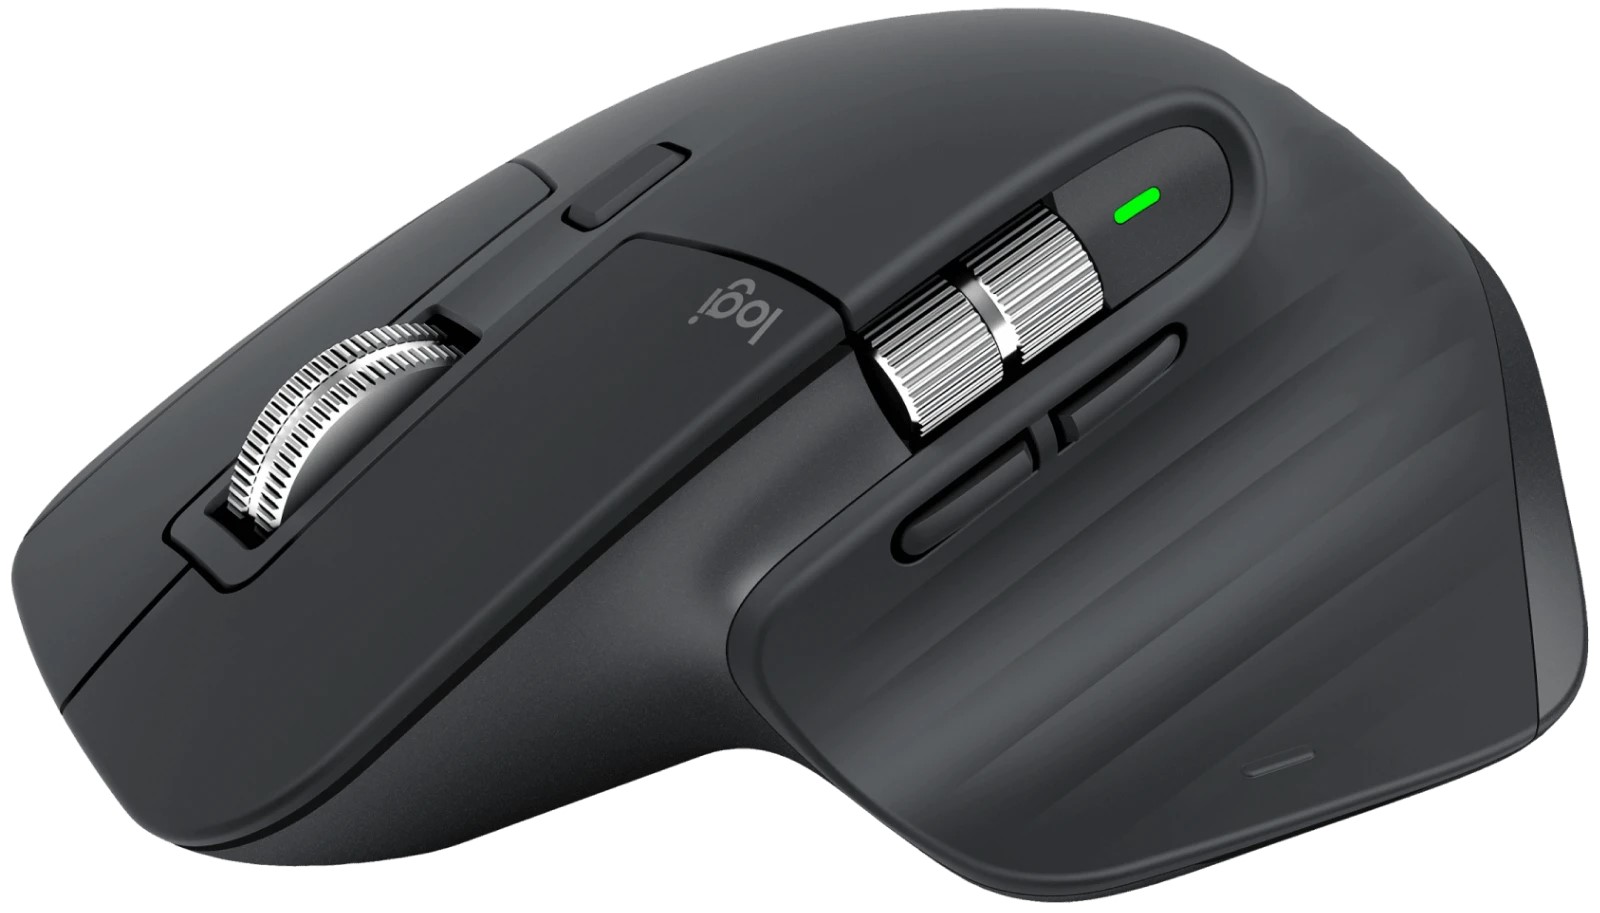 mx master 3s mouse top side view graphite